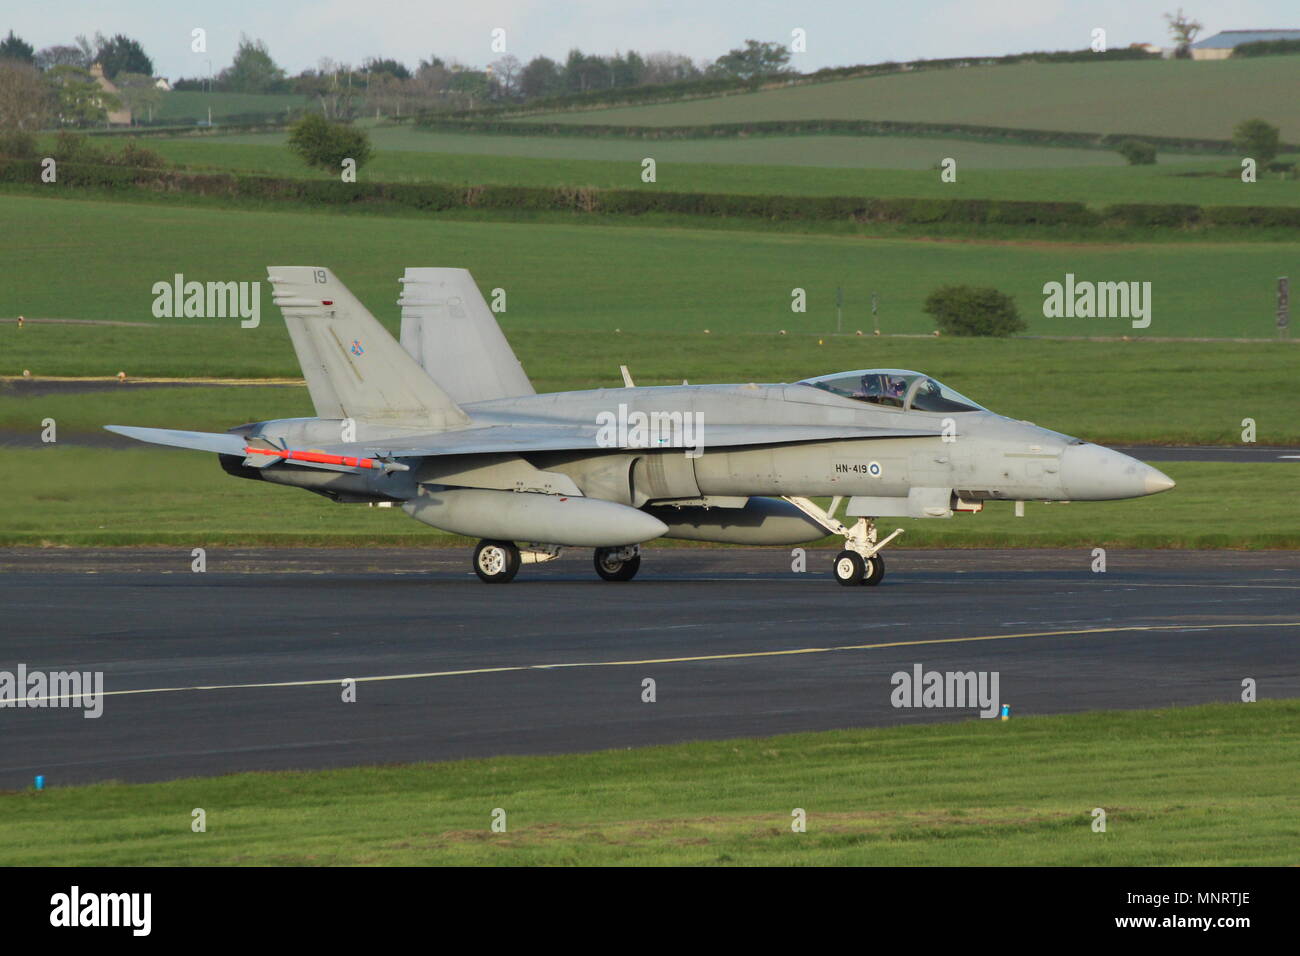 HN-419, a McDonnell Douglas F-18C Hornet operated by the Finnish Air Force, on arrival at Prestwick International Airport in Ayrshire. Stock Photo